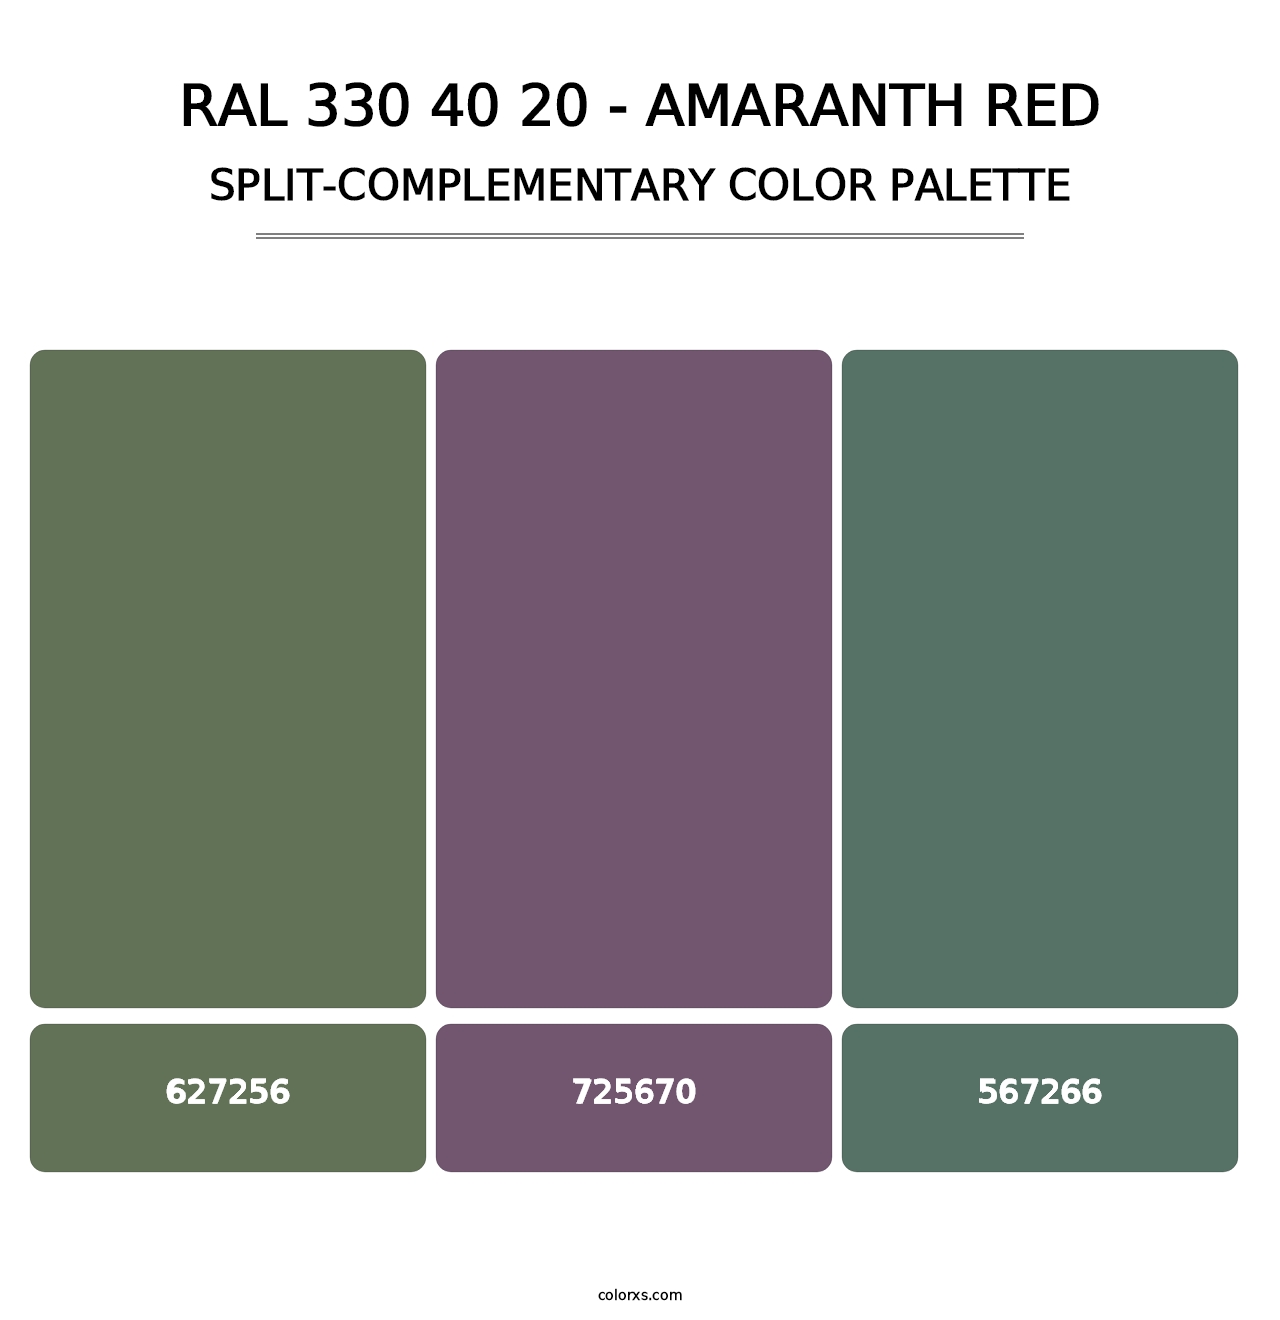 RAL 330 40 20 - Amaranth Red - Split-Complementary Color Palette